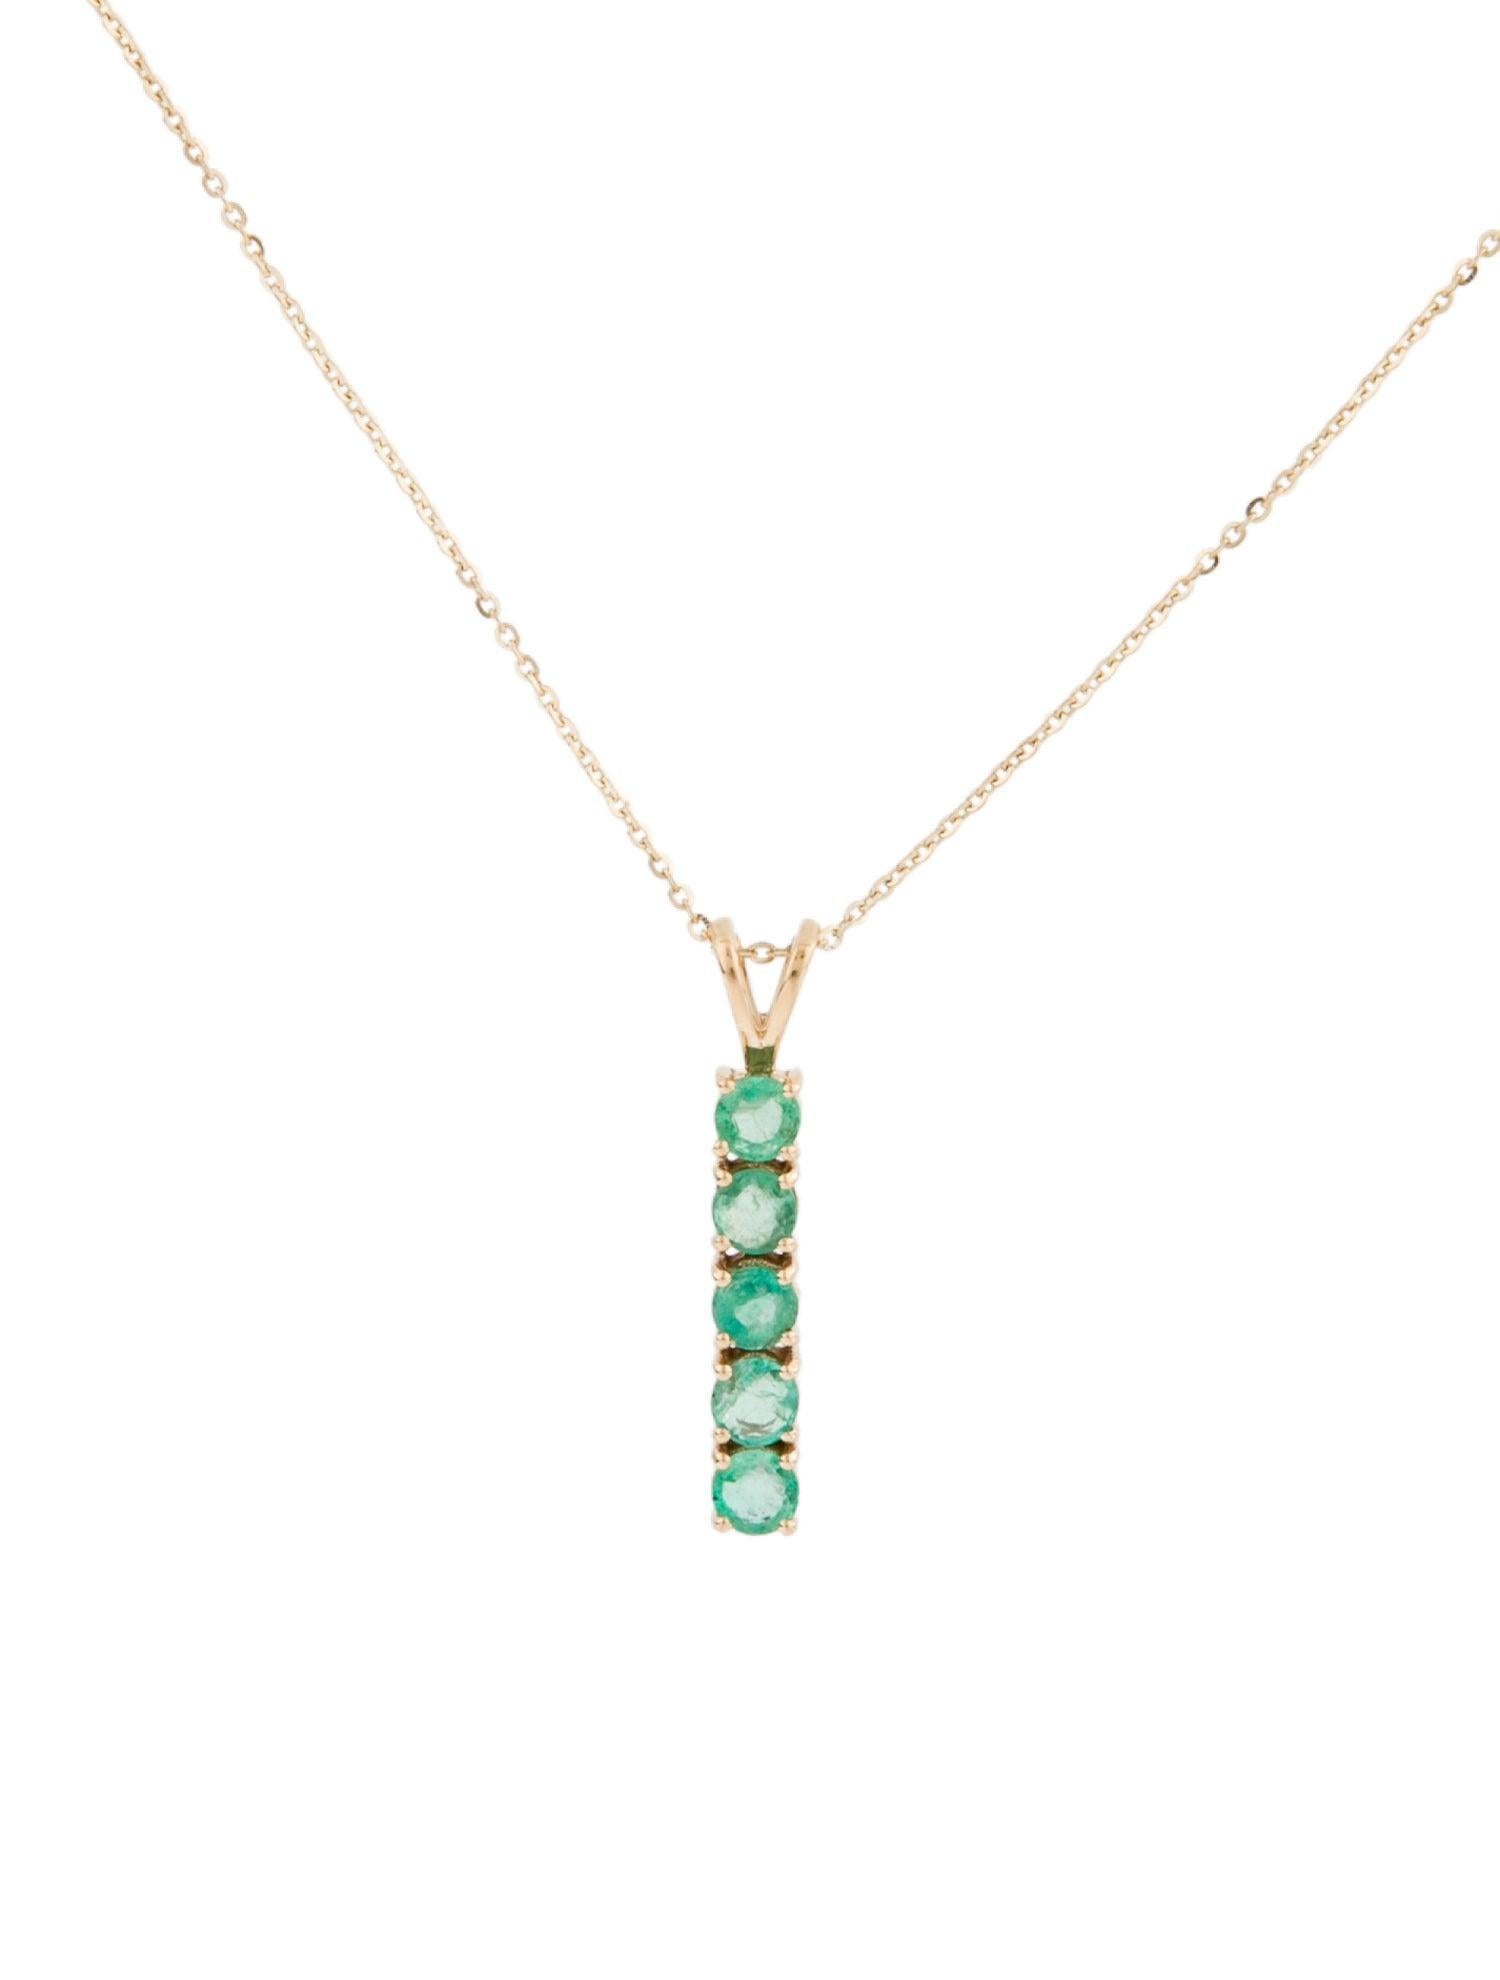 Immerse yourself in the allure of nature with our Forest Ferns Emerald Pendant, a mesmerizing masterpiece within the Jeweltique collection. This pendant is a celebration of the breathtaking beauty found in the heart of lush, verdant